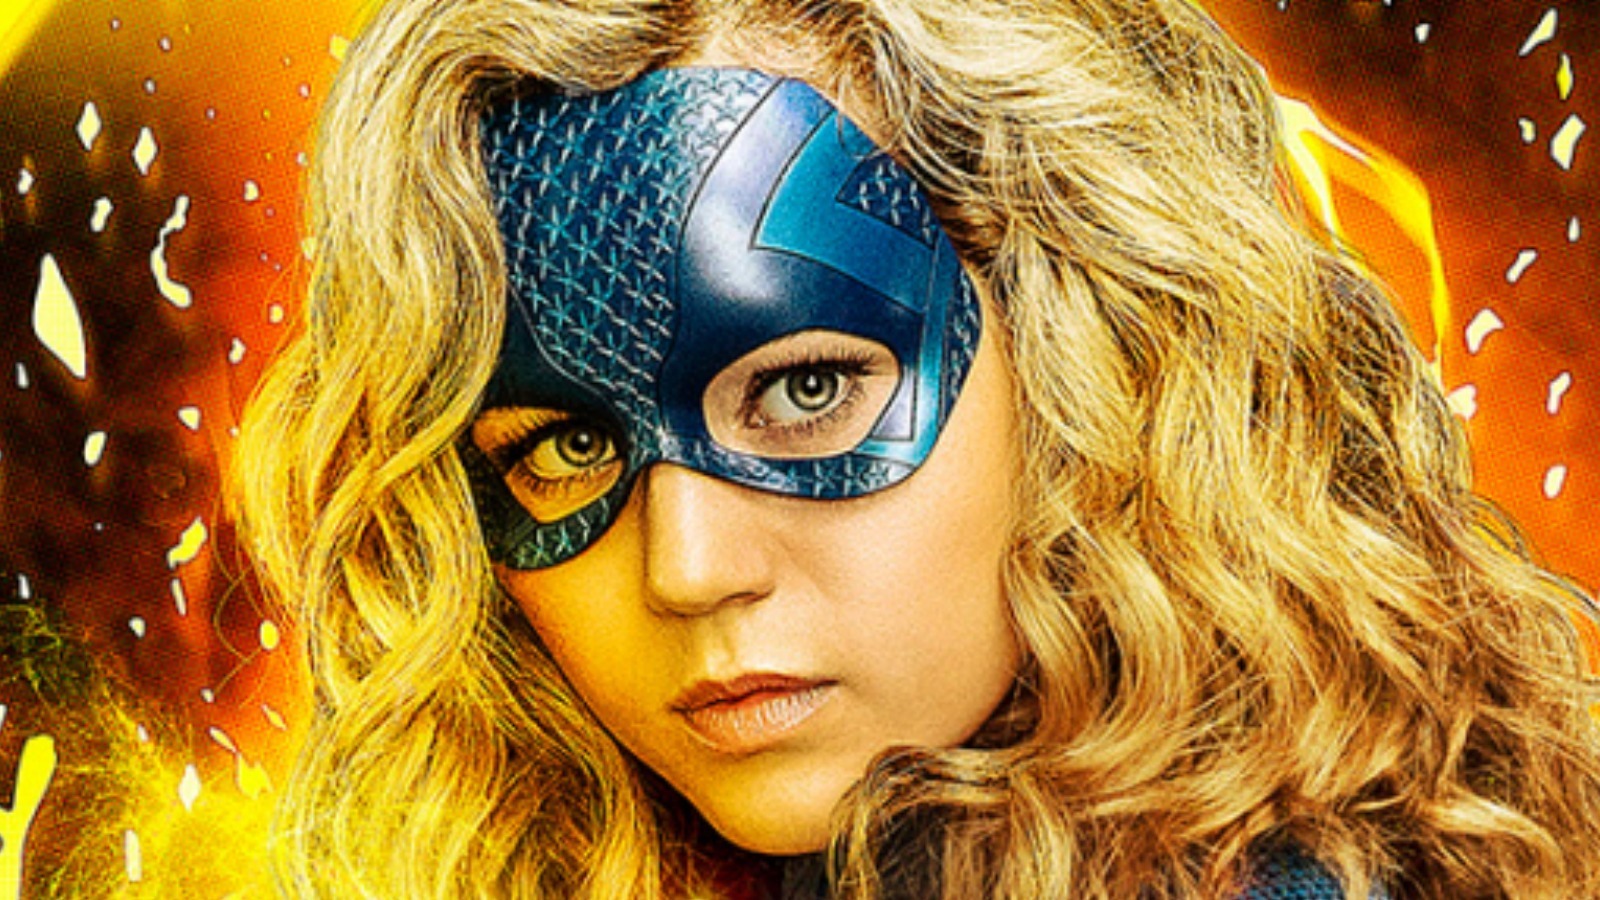 Stargirl Season 2 Release Date, Cast, And Plot - What We Know So Far